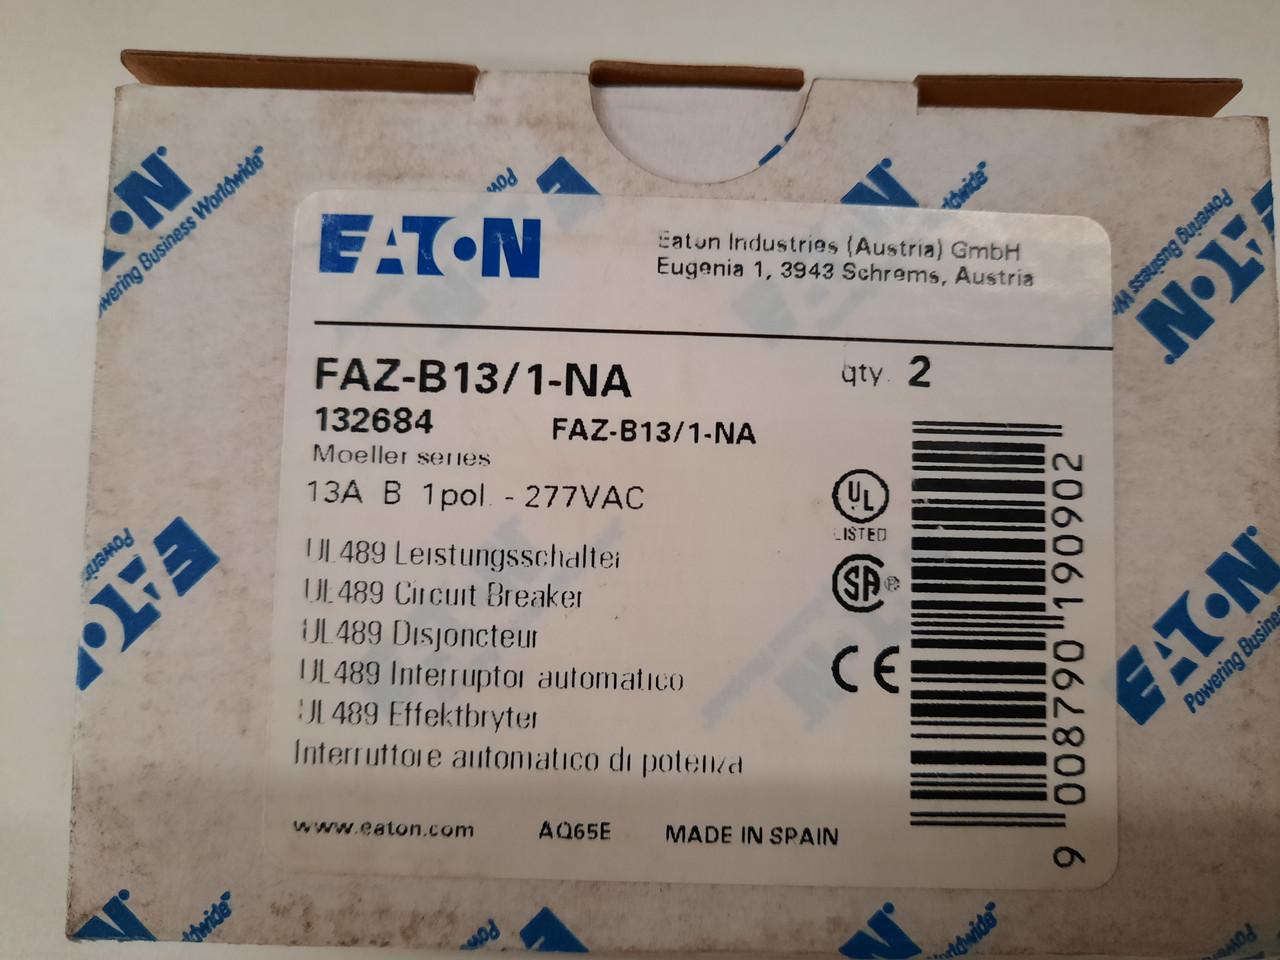 Eaton FAZ-B13/1-NA 277/480 VAC 50/60 Hz, 13 A, 1-Pole, 10/14 kA, 3 to 5 x Rated Current, Screw Terminal, DIN Rail Mount, Standard Packaging, B-Curve, Current Limiting, Thermal Magnetic